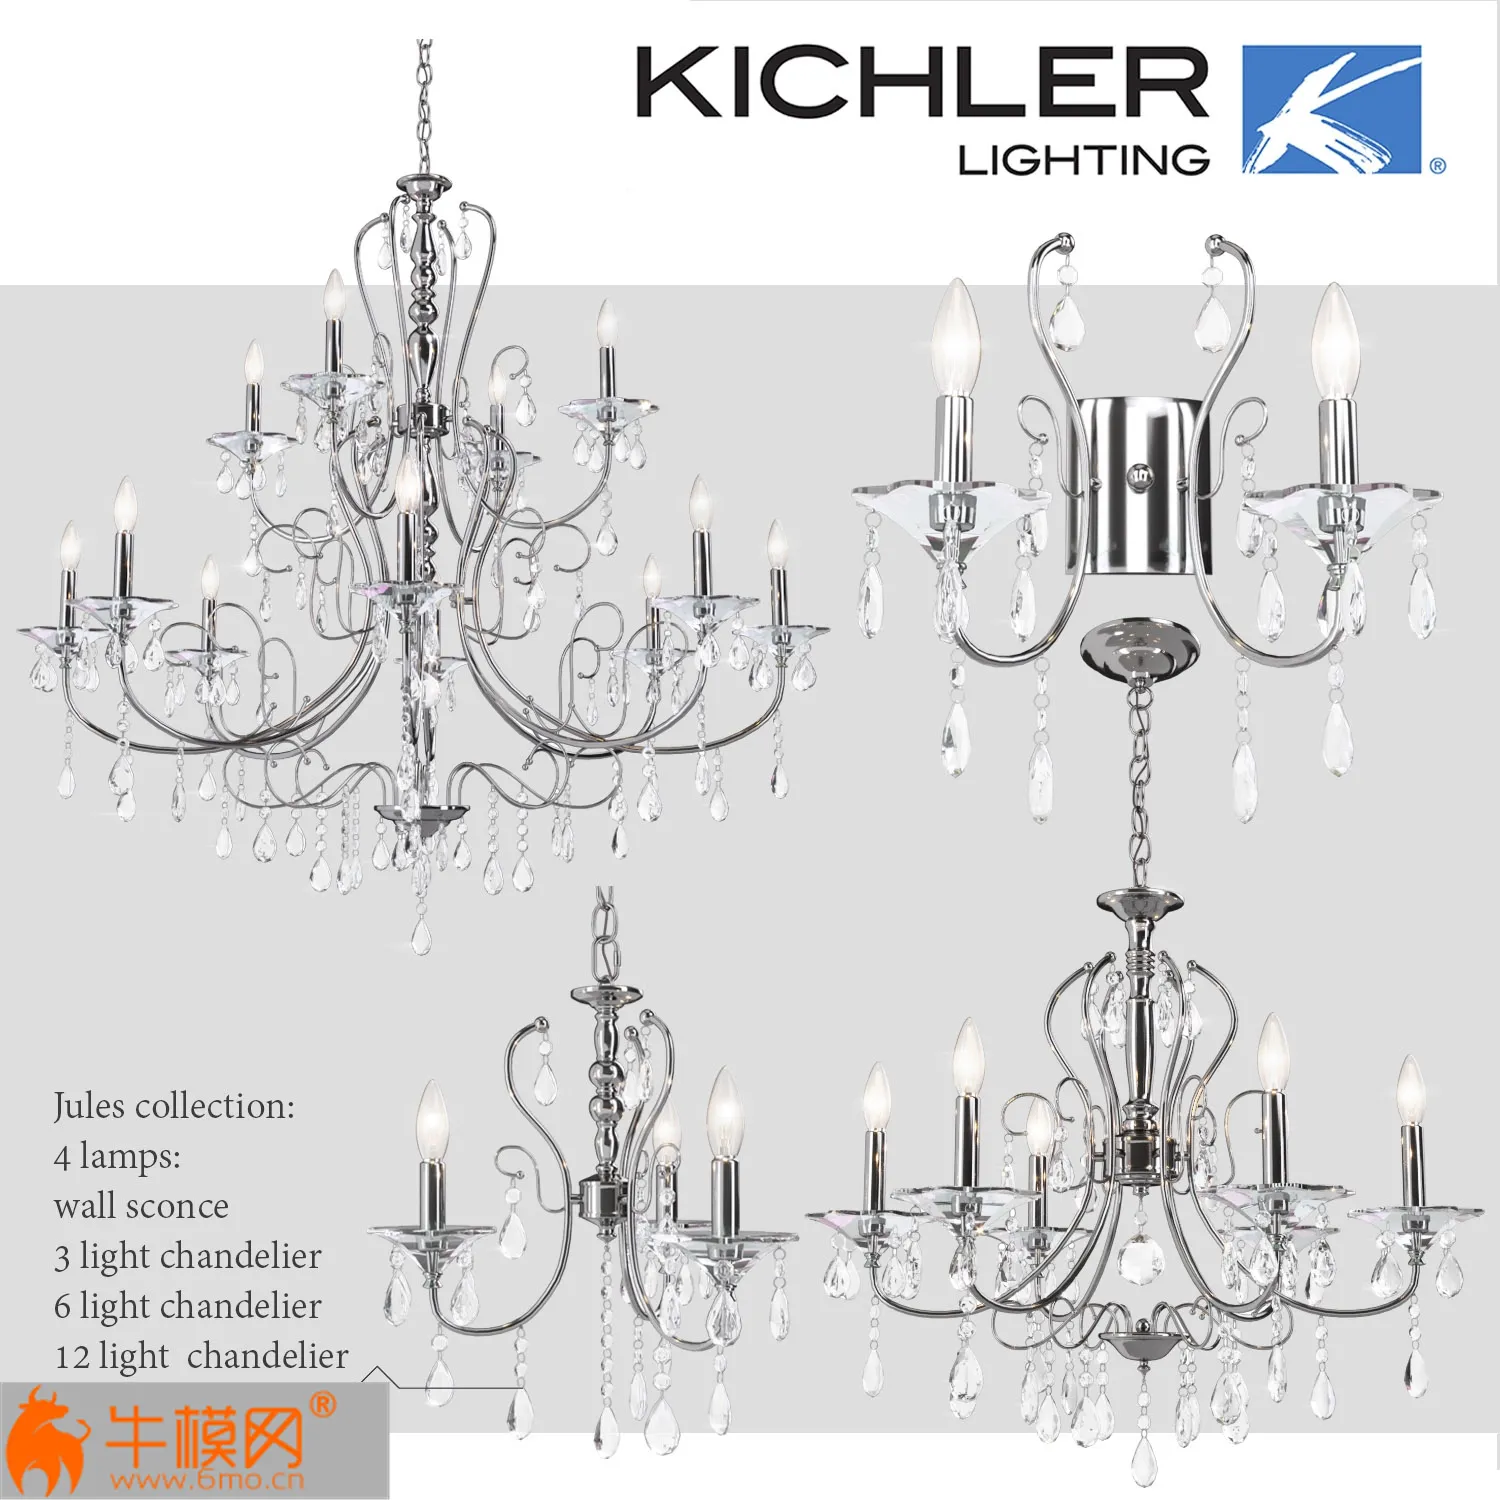 Lamps Kichler Jules collection – 5322